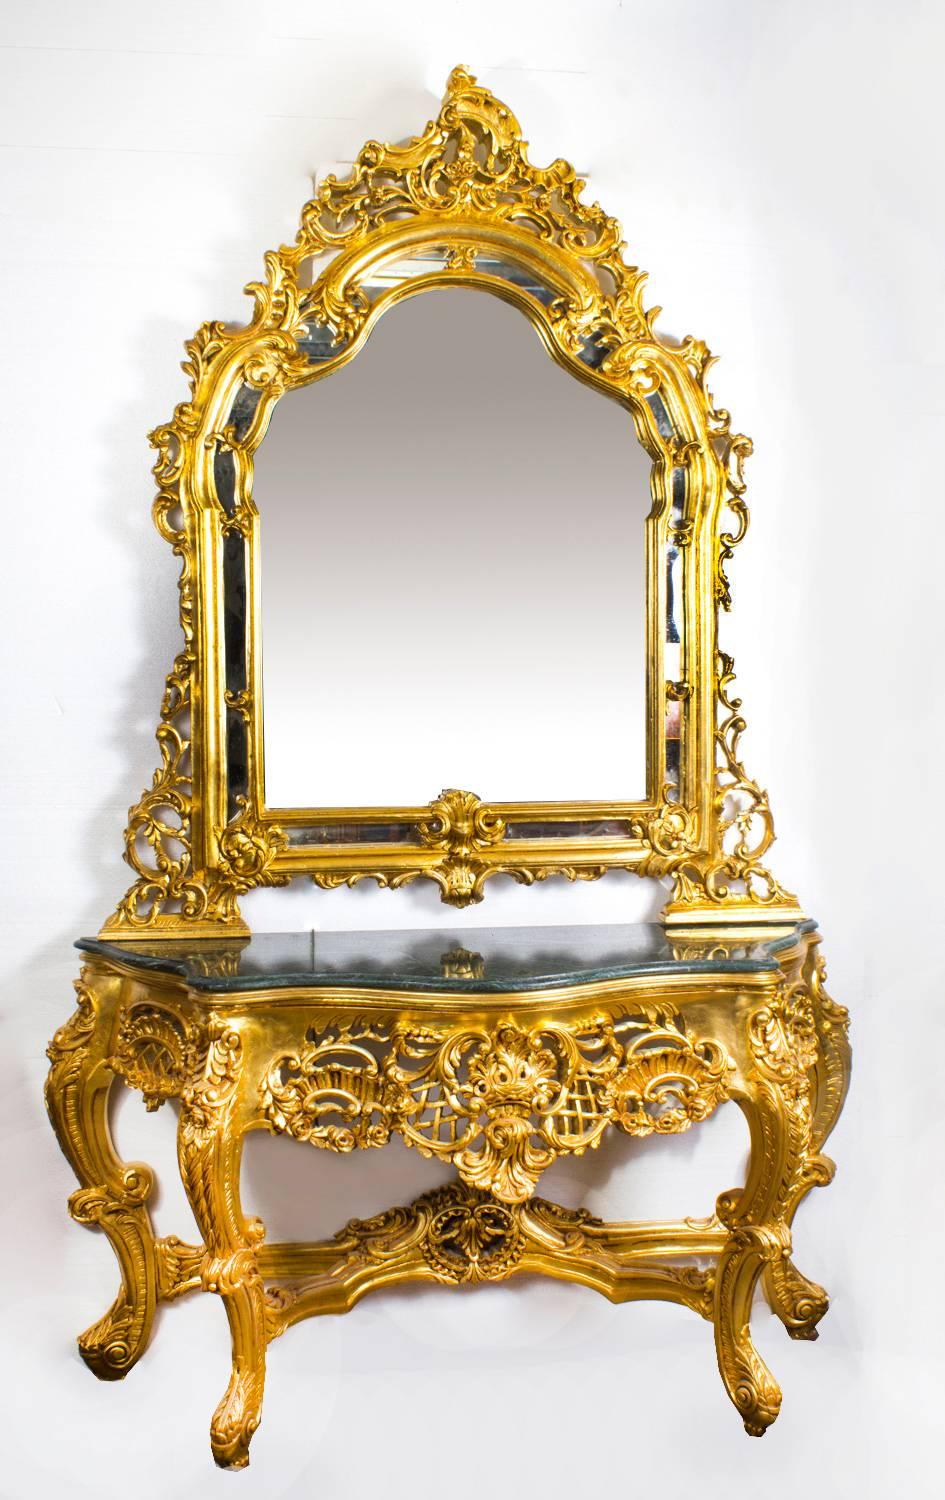 A highly ornate and absolutely stunning Louis Revival carved giltwood console table with matching mirror dating from the late 20th century.

The console table features an attractive green 'Verde Antico' marble top of the highest quality.

There